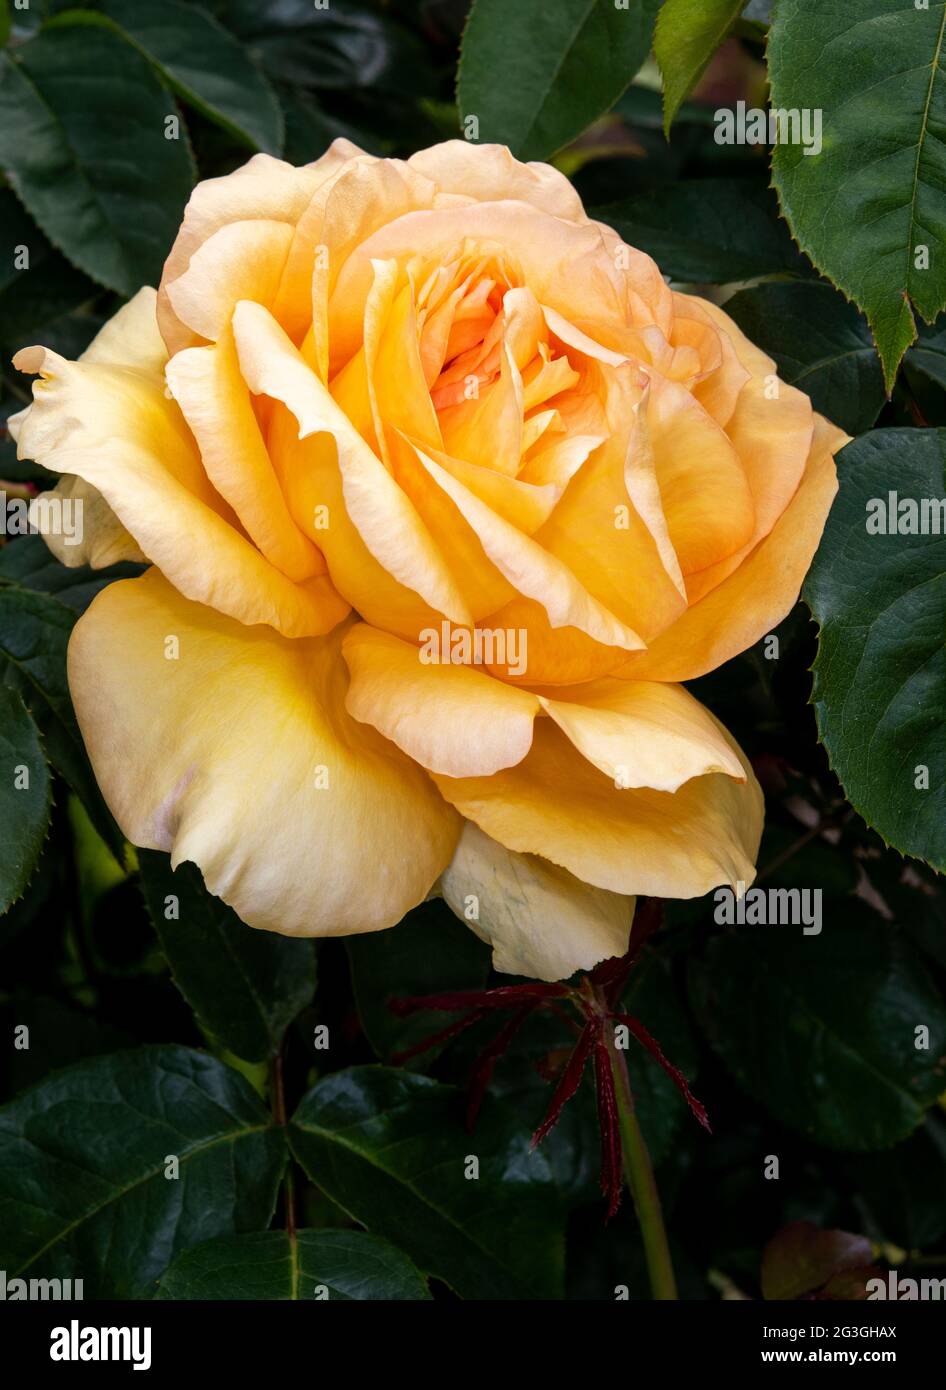 A luscious apricot coloured garden rose surrounded by dark green leaves, Central York, North Yorkshire, UK Stock Photo